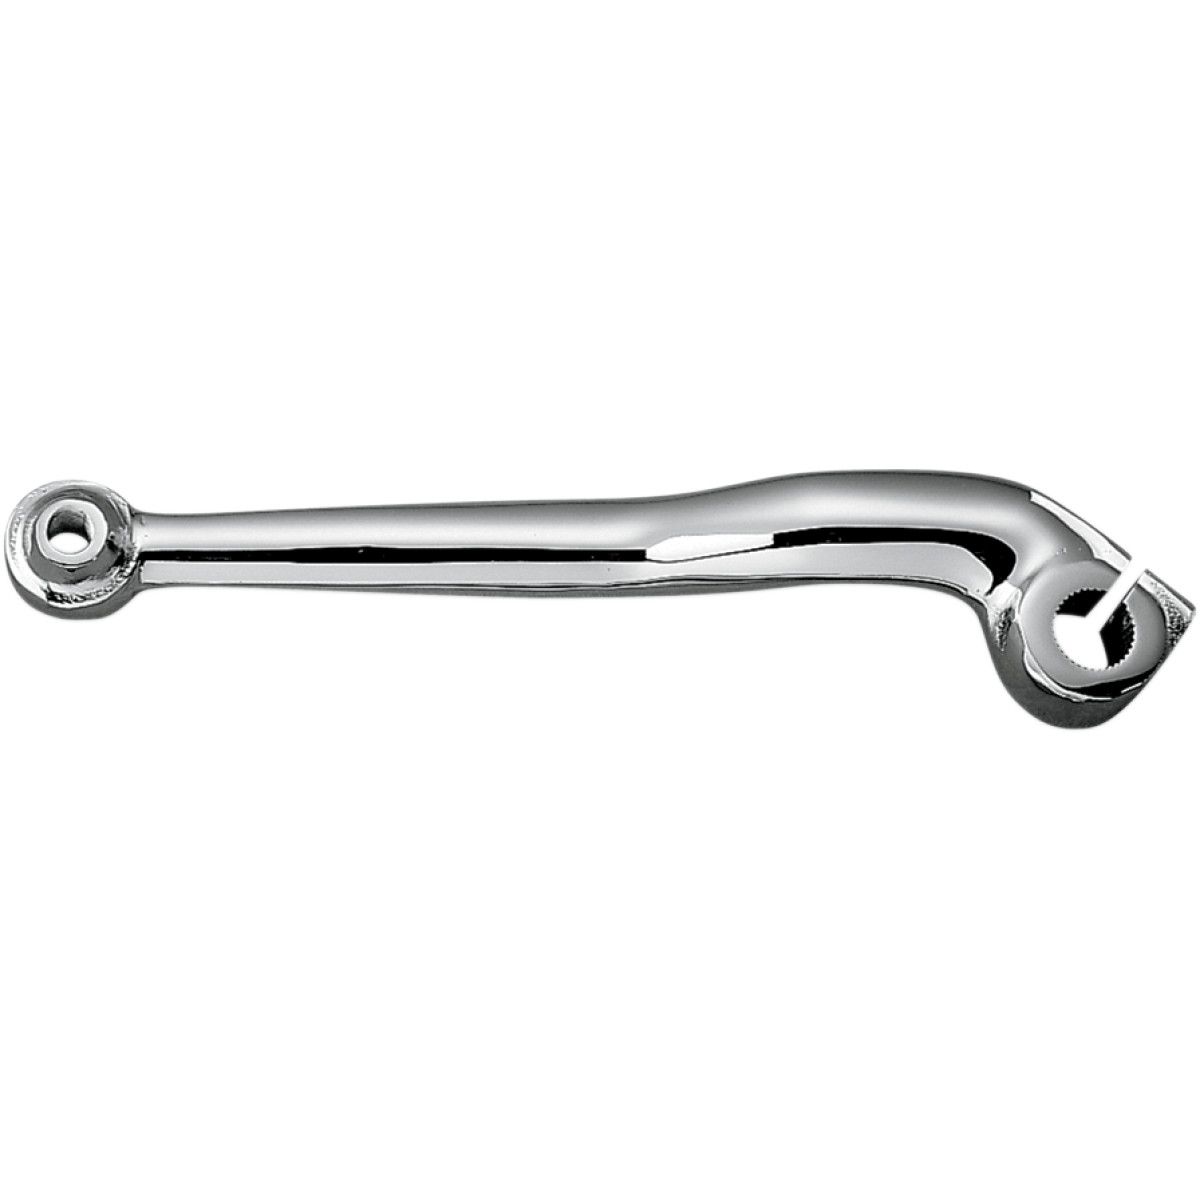 Drag Specialties Die-Cast Shift Lever For Harley-Davidson Chrome DS-273926